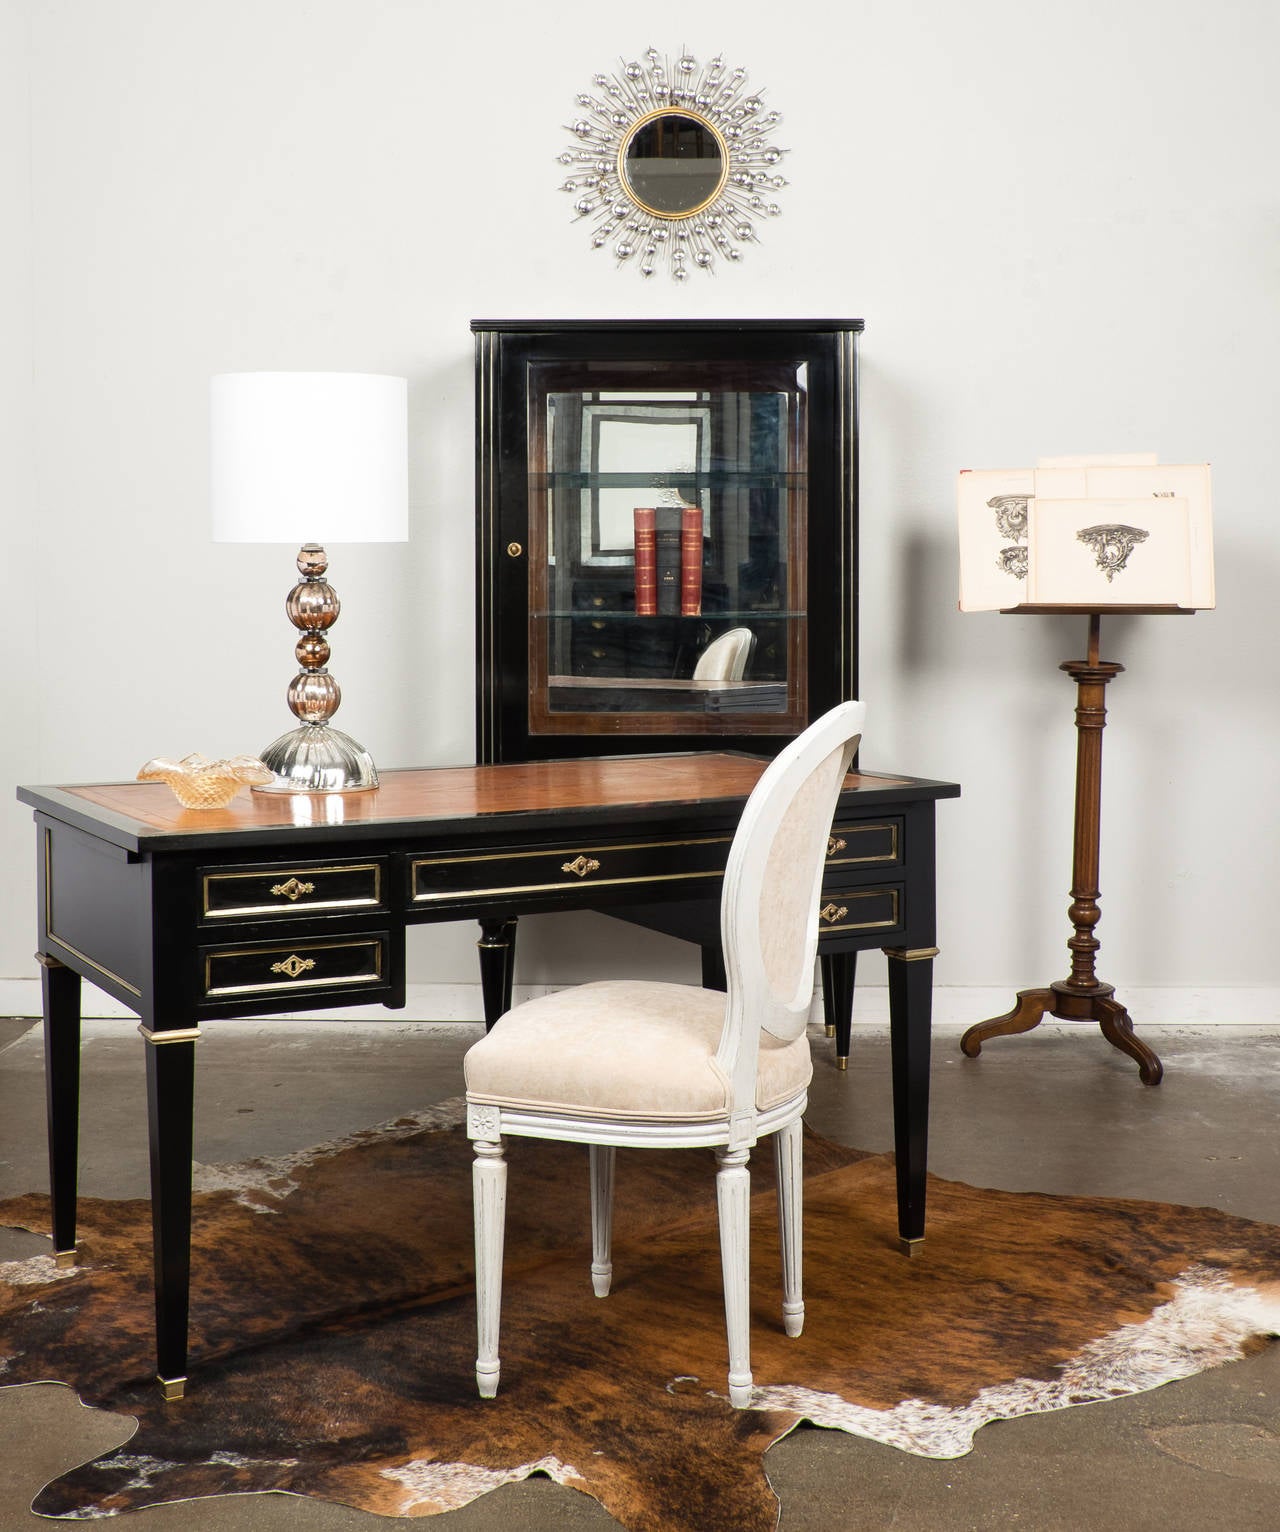 French Directoire style desk in ebonized mahogany with a lustrous French polish finish, fine brass trim, and beautiful embossed tan leather top. Five dovetailed drawers and two leather topped pull-out writing shelves. The back is finished in faux